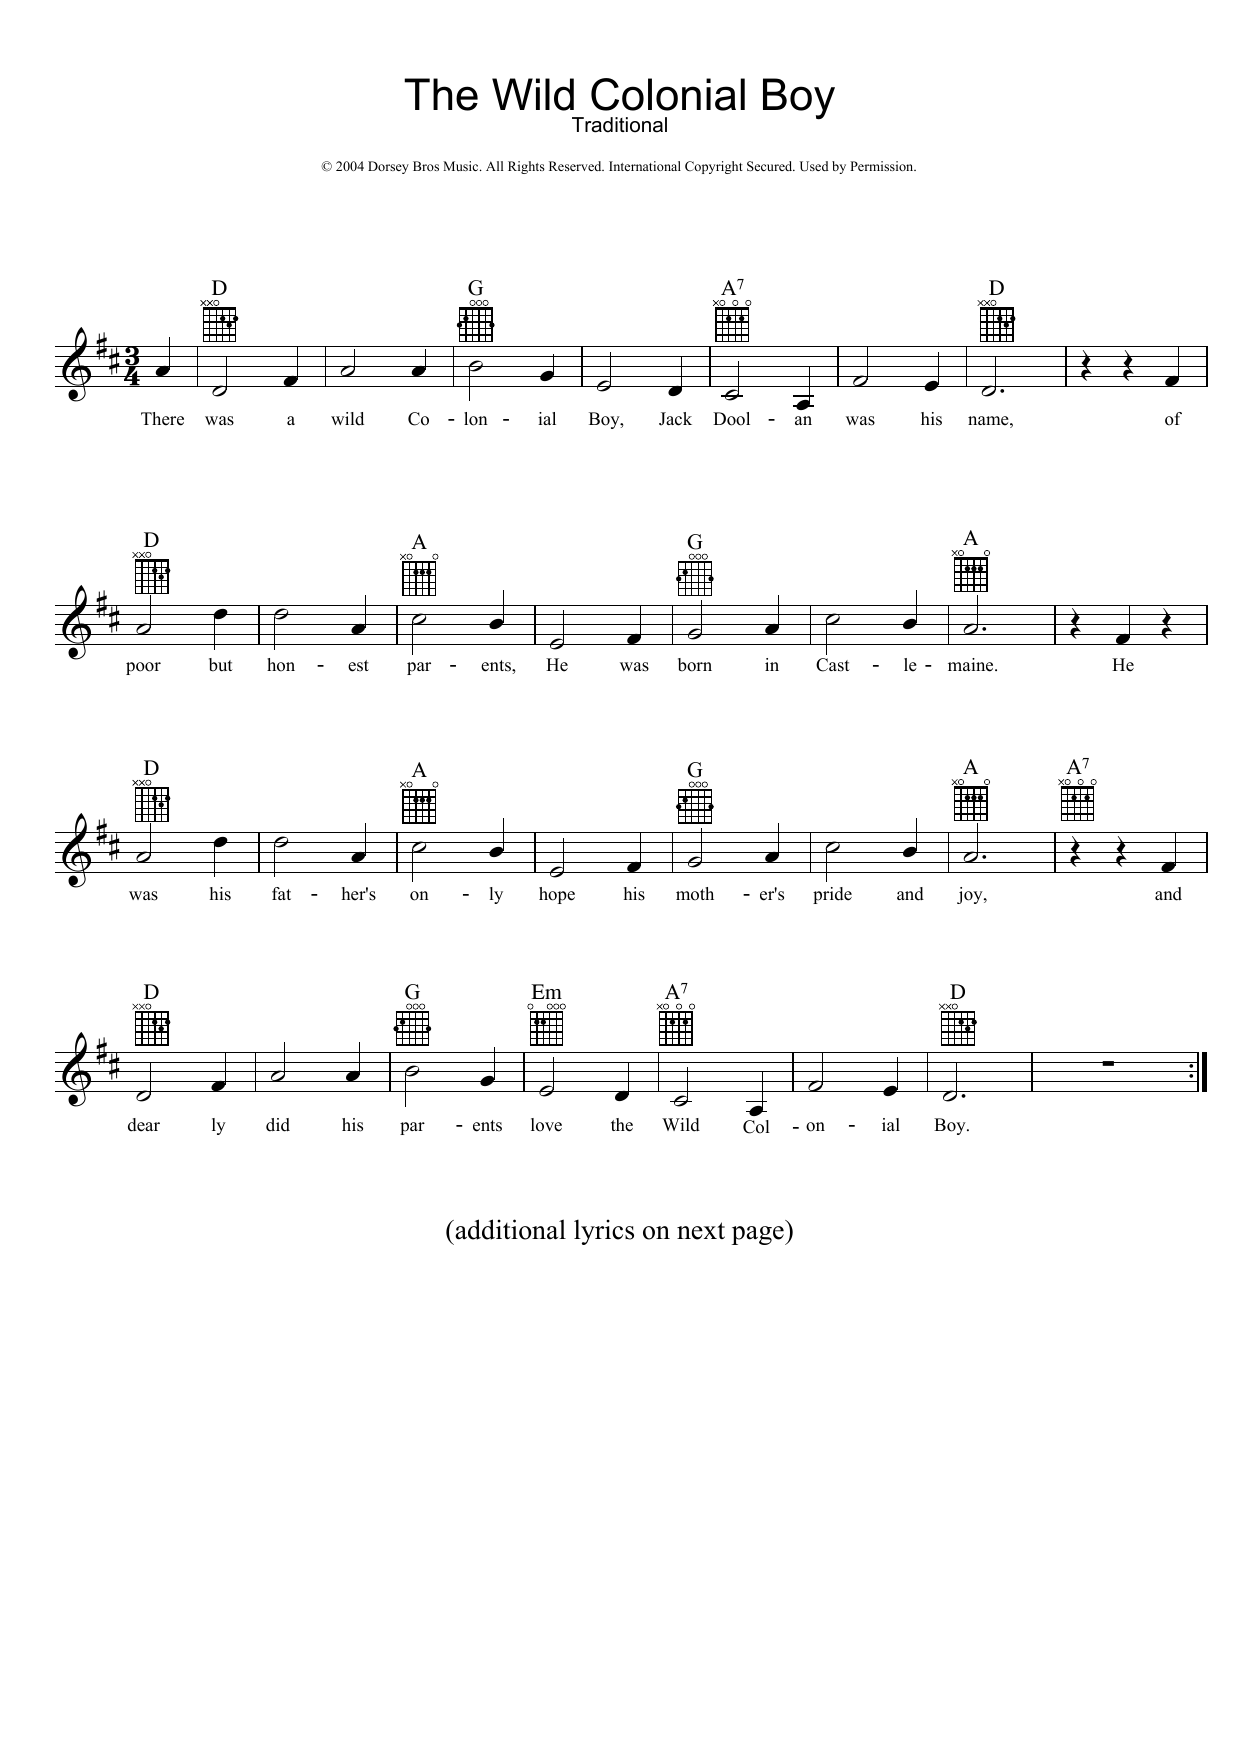 Download Traditional The Wild Colonial Boy Sheet Music